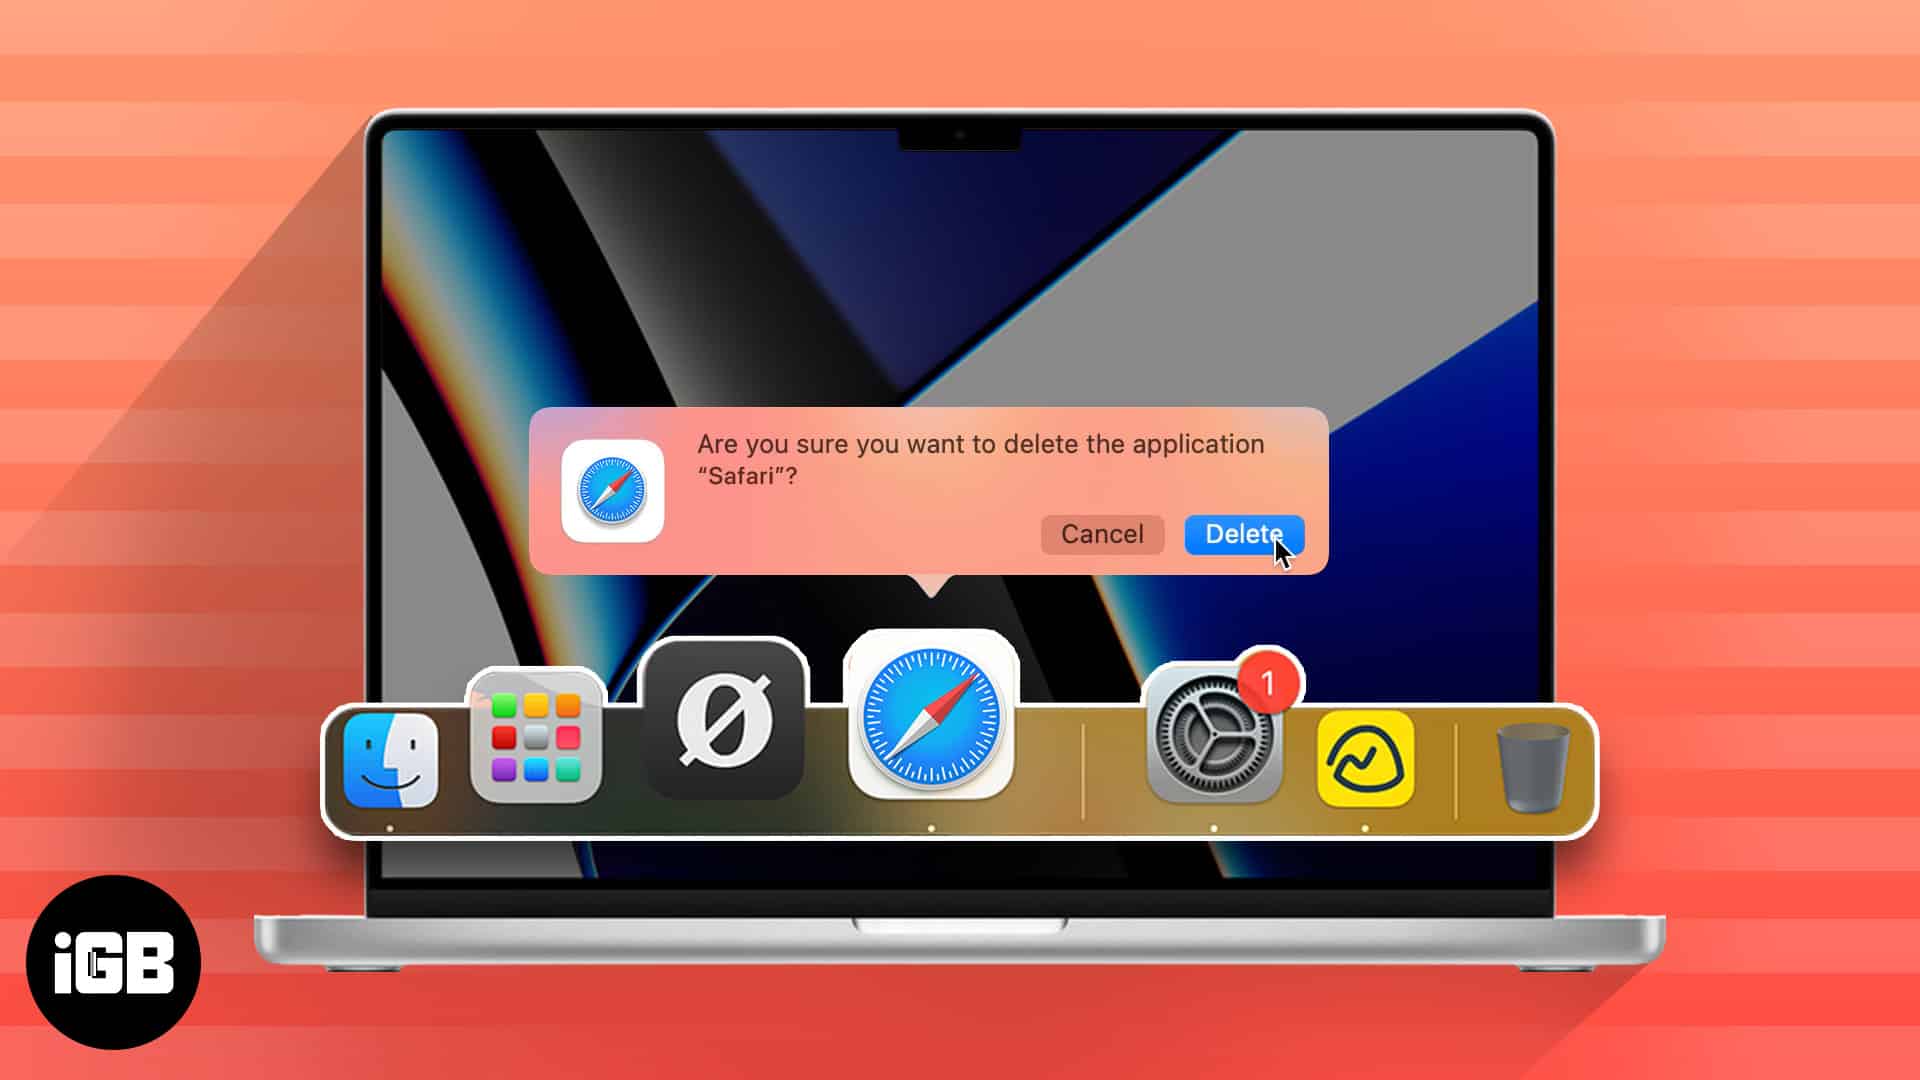 How to uninstall apps on mac